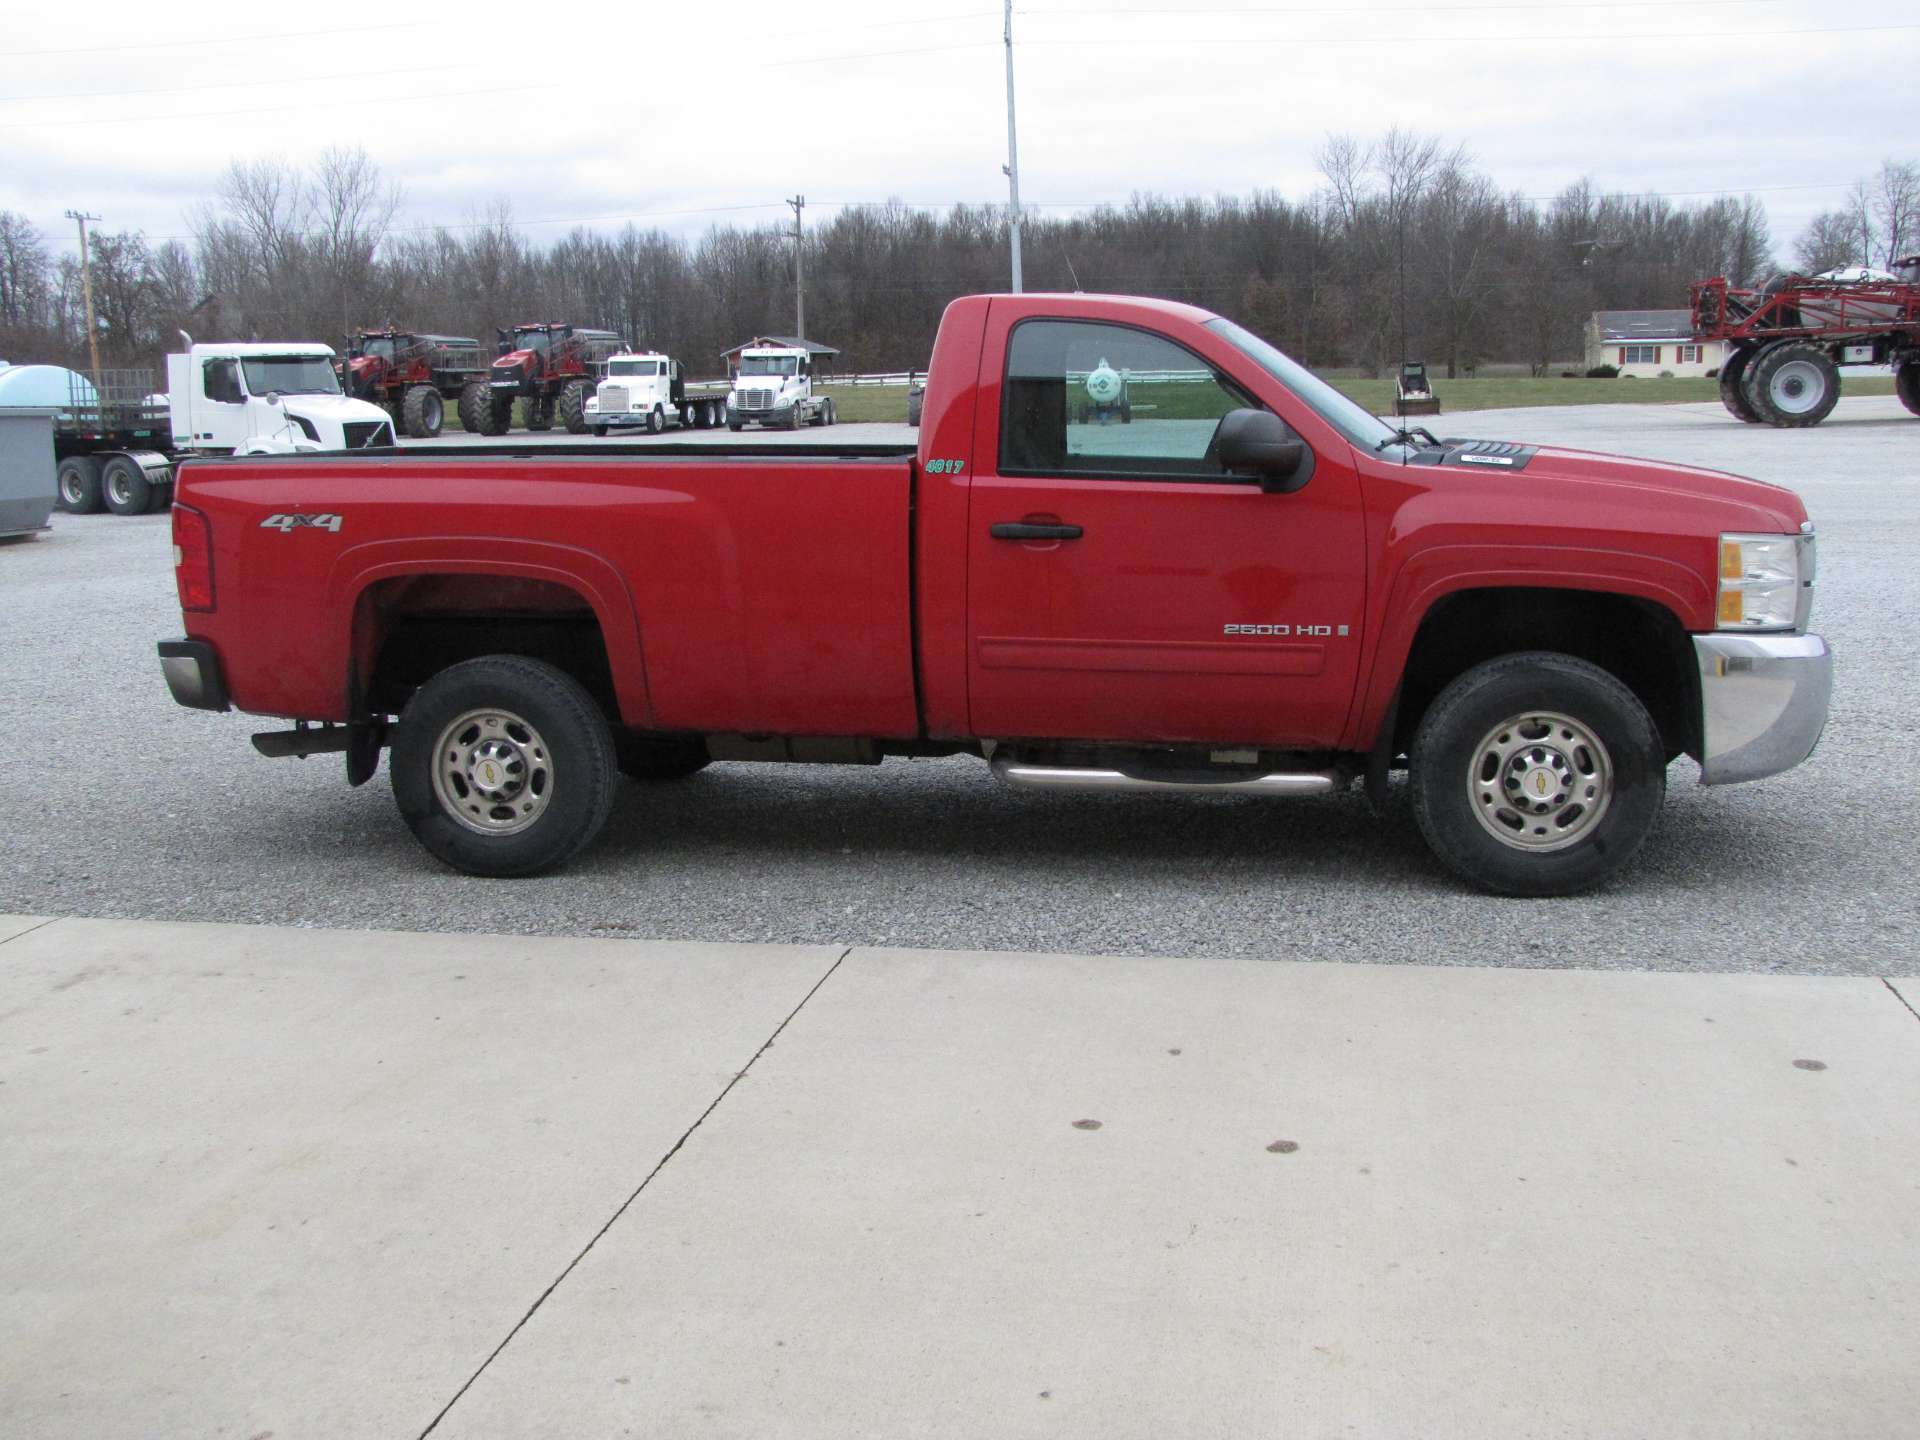 2009 Chevy 2500 HD LT pickup truck - Image 14 of 69